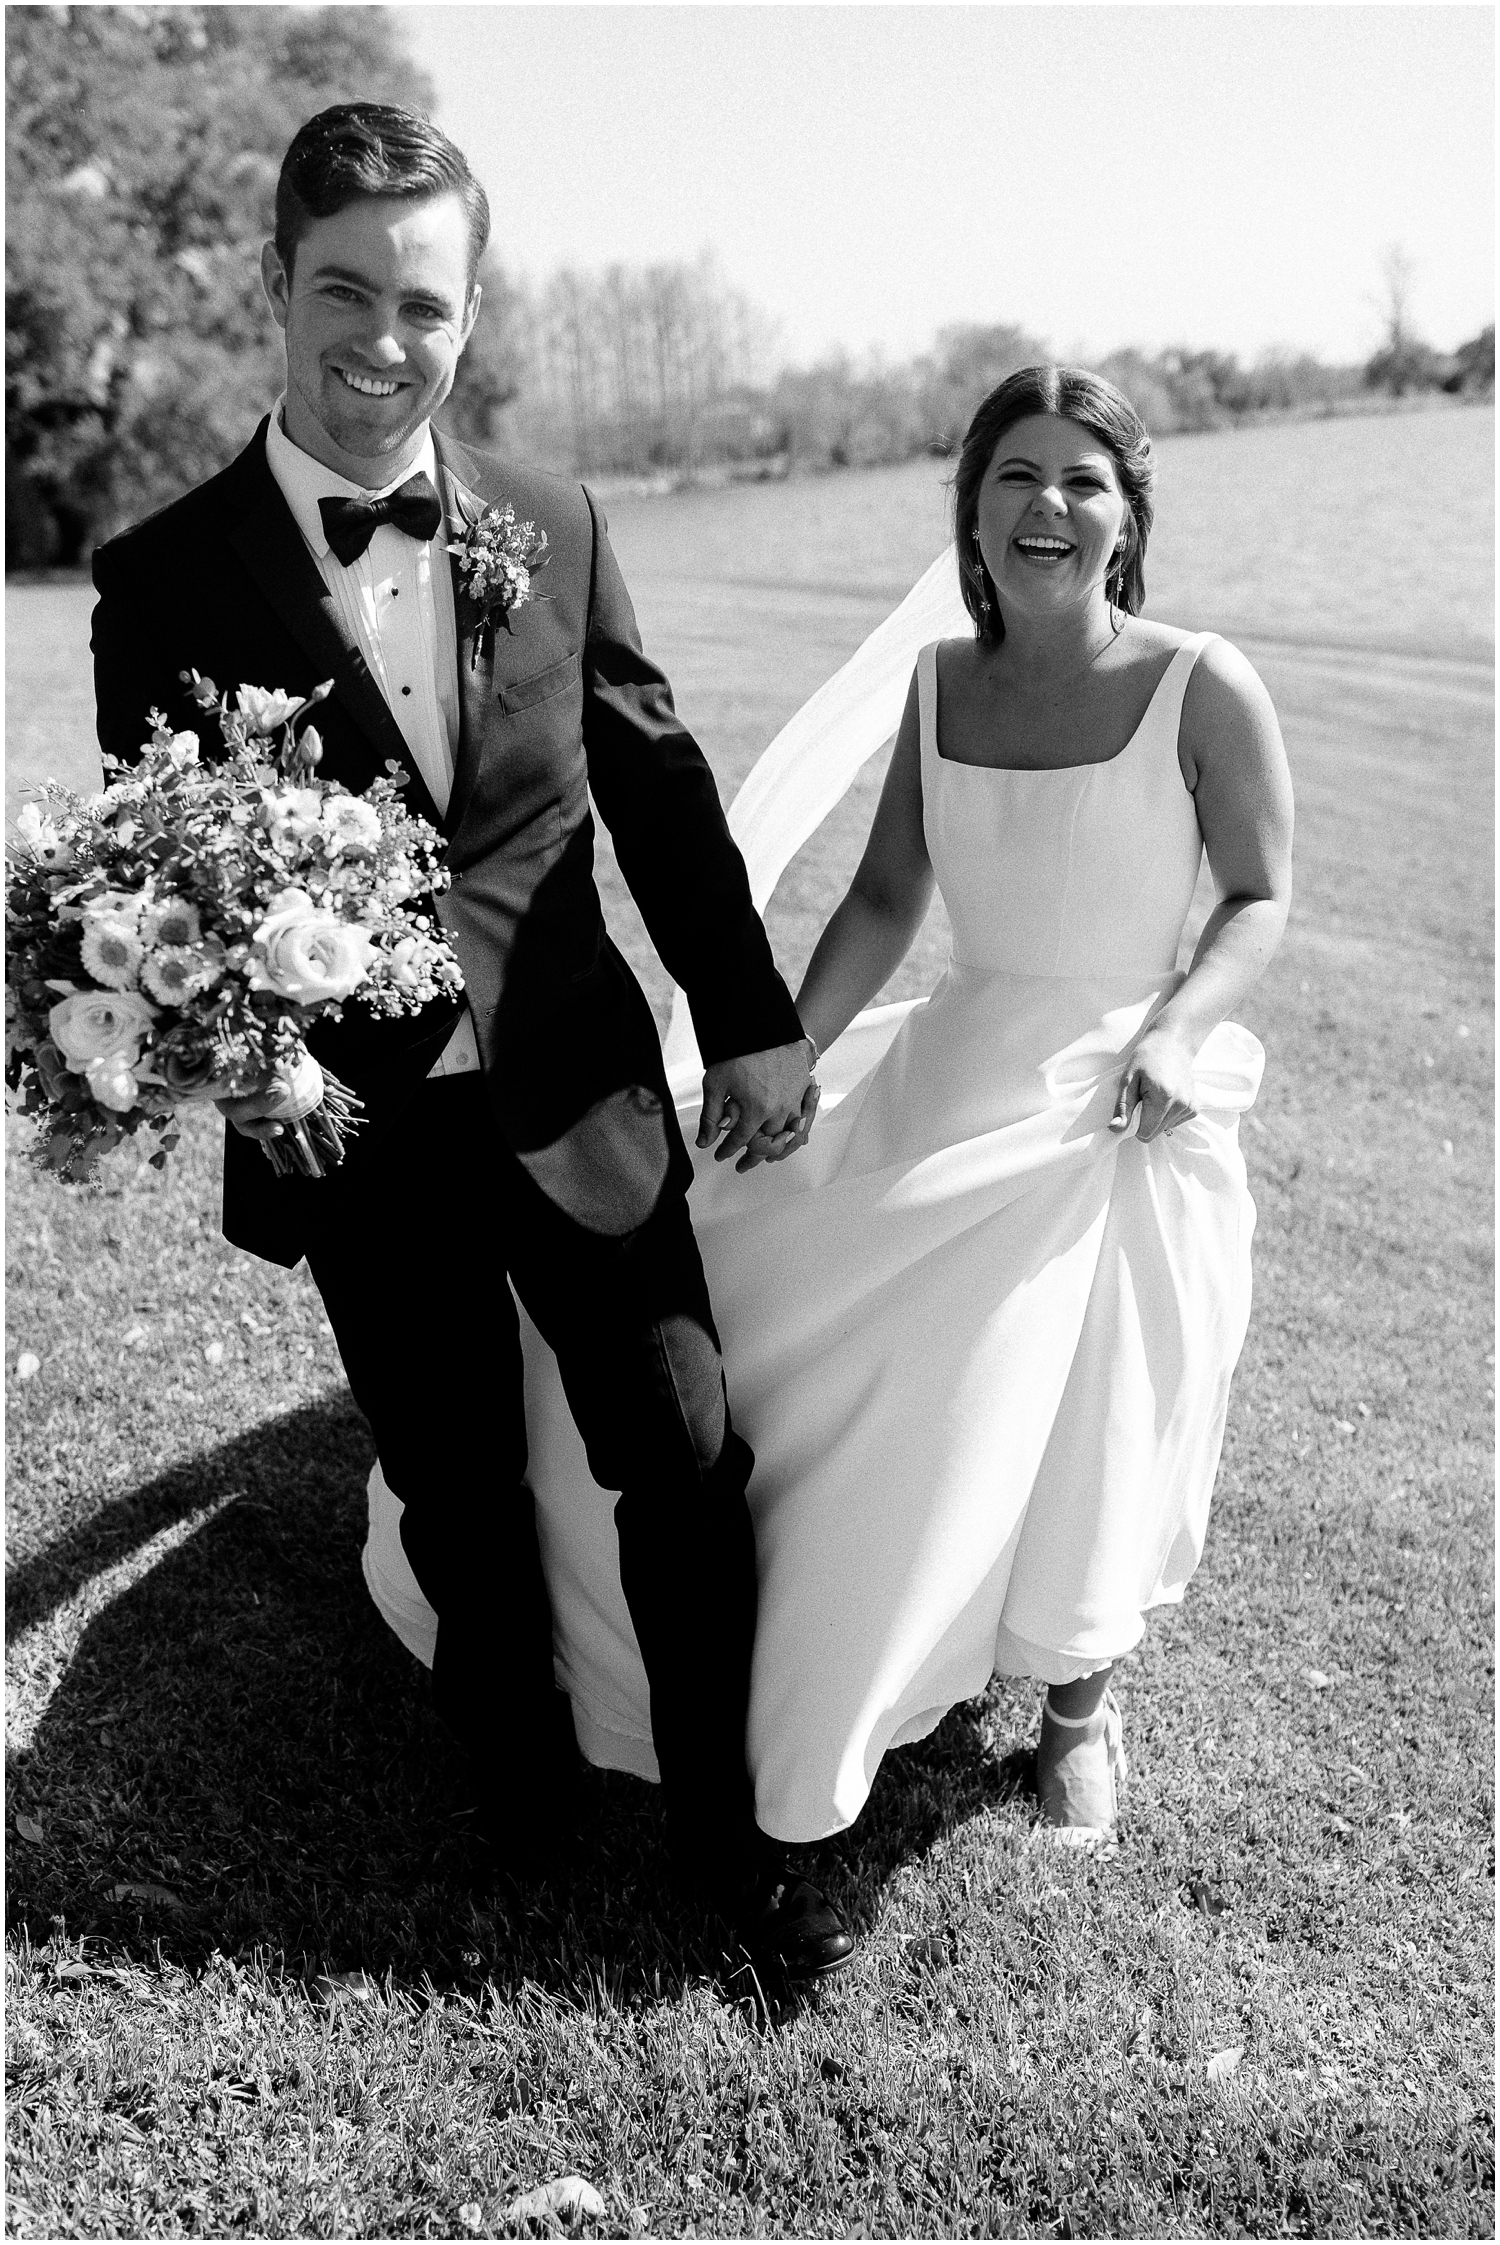 A bride and groom hold hands in a field in a black and white wedding photo at Rip Van Winkle Gardens.